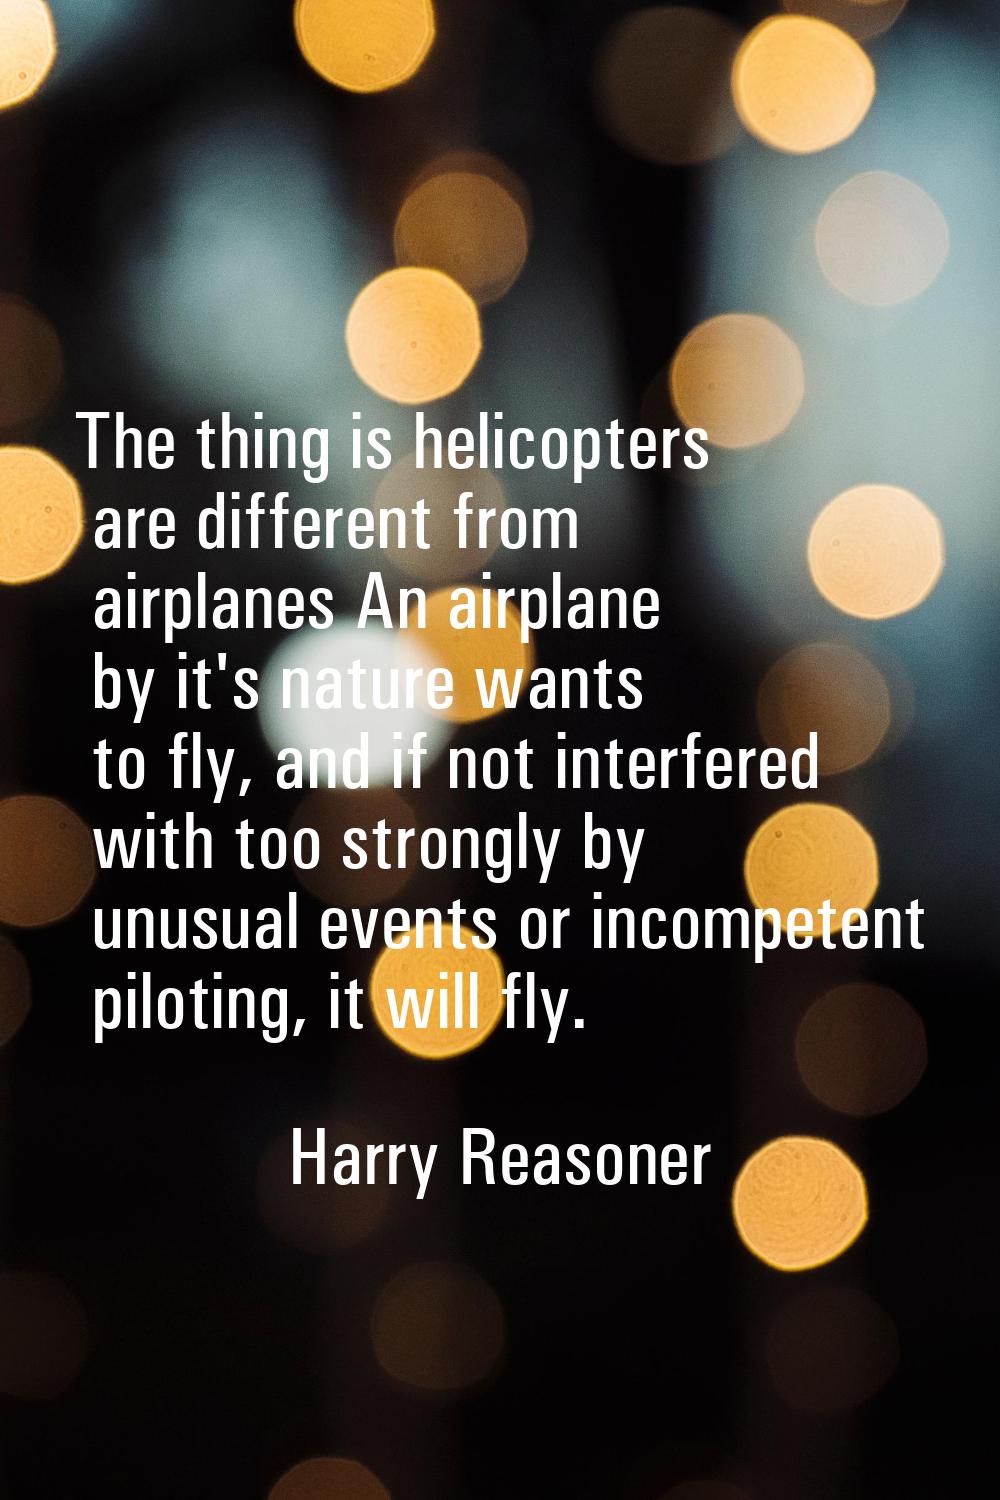 The thing is helicopters are different from airplanes An airplane by it's nature wants to fly, and 